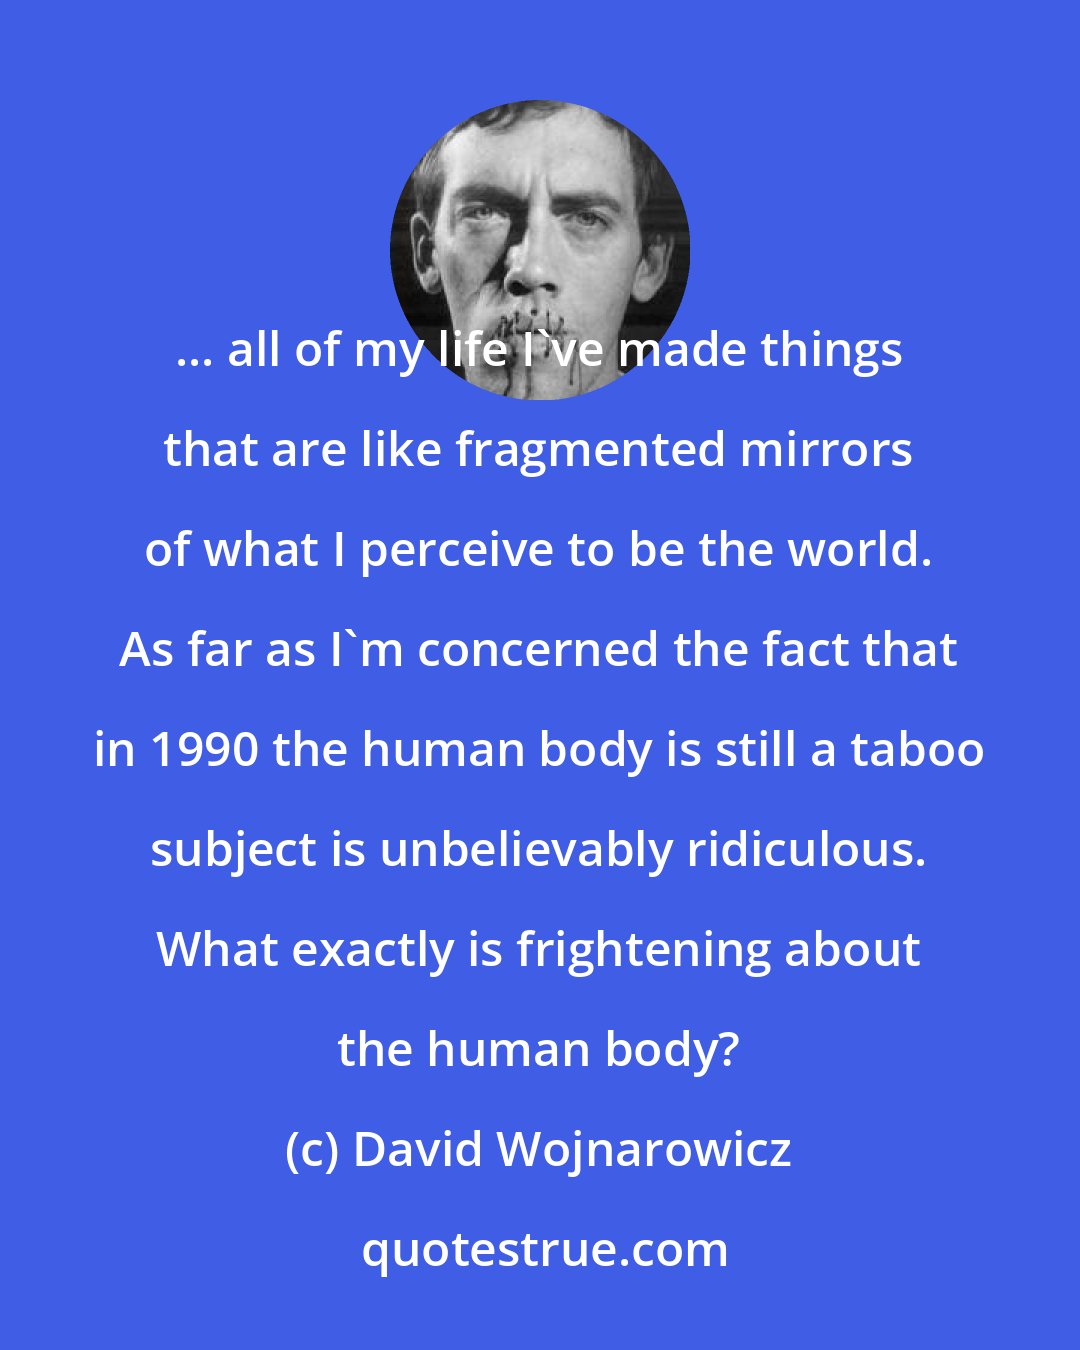 David Wojnarowicz: ... all of my life I've made things that are like fragmented mirrors of what I perceive to be the world. As far as I'm concerned the fact that in 1990 the human body is still a taboo subject is unbelievably ridiculous. What exactly is frightening about the human body?